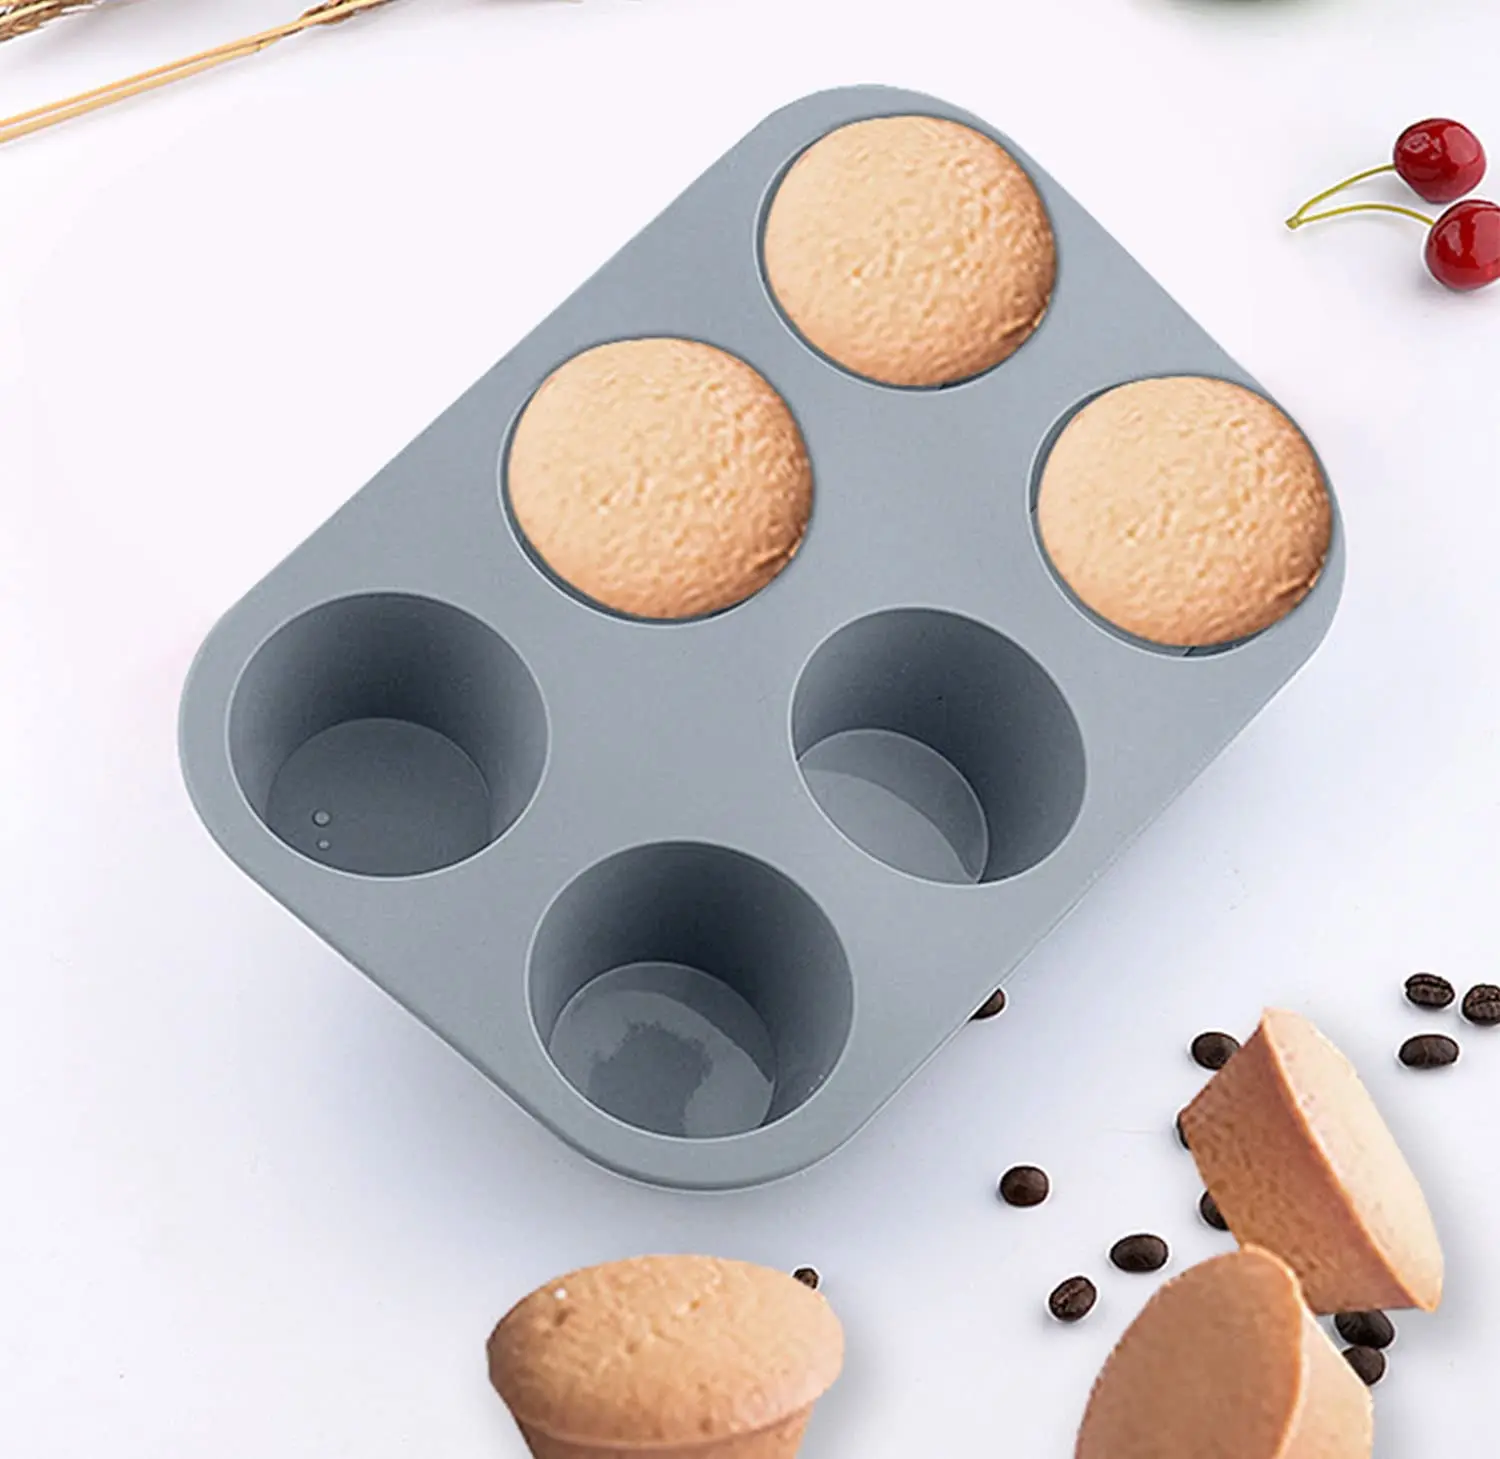 BPA Free Round/Square Cake Pan, Loaf Pan, Muffin Pan for Bread Pizza Cheesecake Cupcake Pie Desserts 7in1 Baking Set with Box